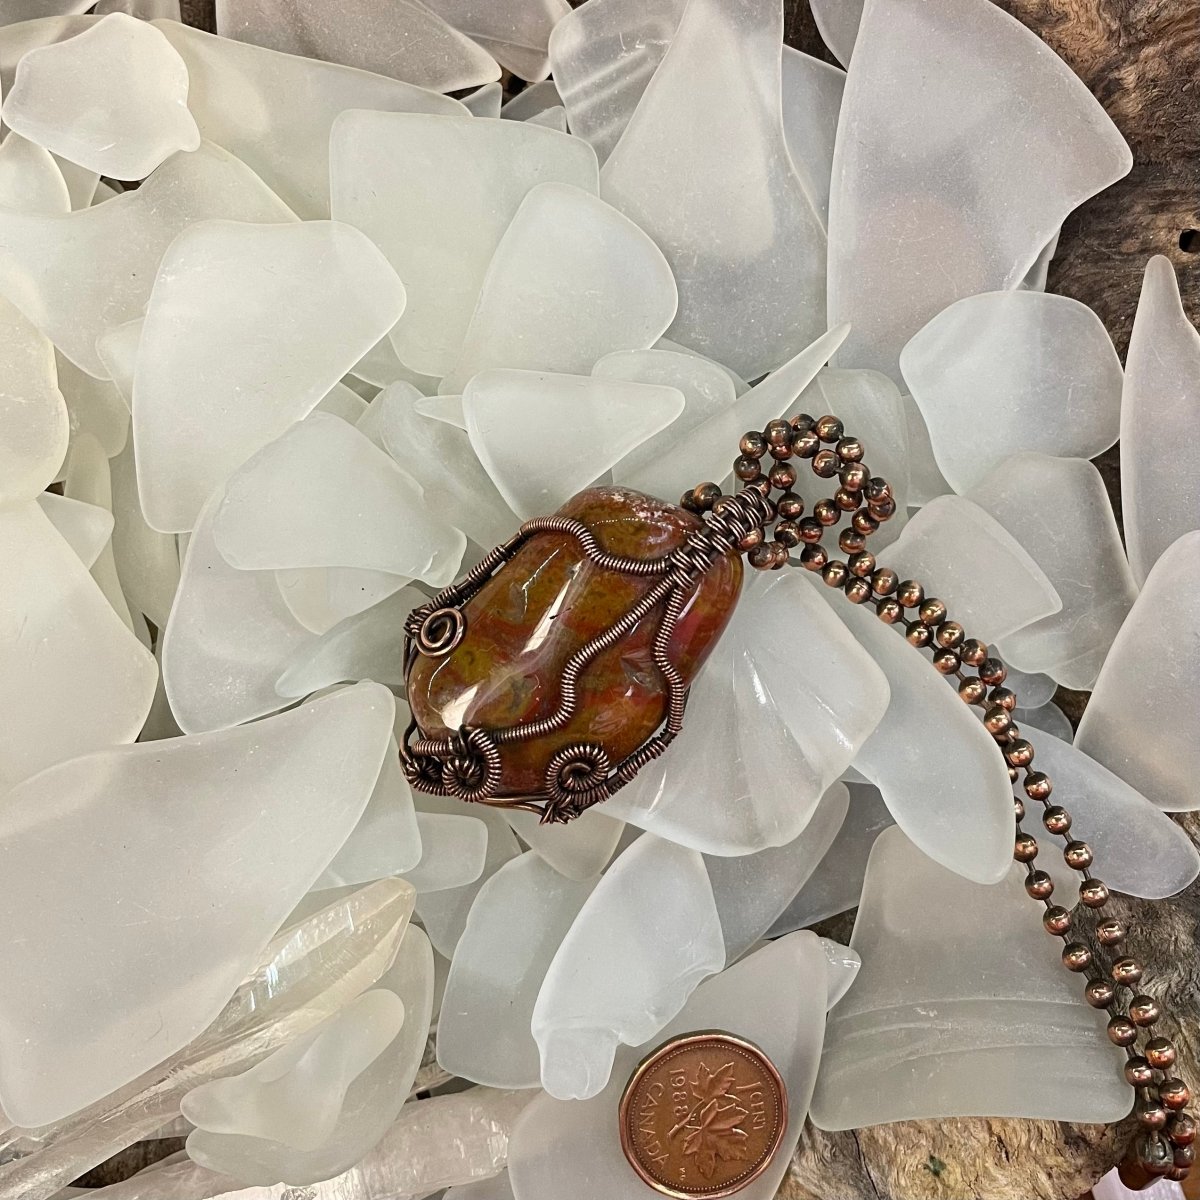 Bay of Fundy Agate Necklace - Mother Of Metal - Bay of Fundy Agate - Bay of Fundy Collection - Copper-